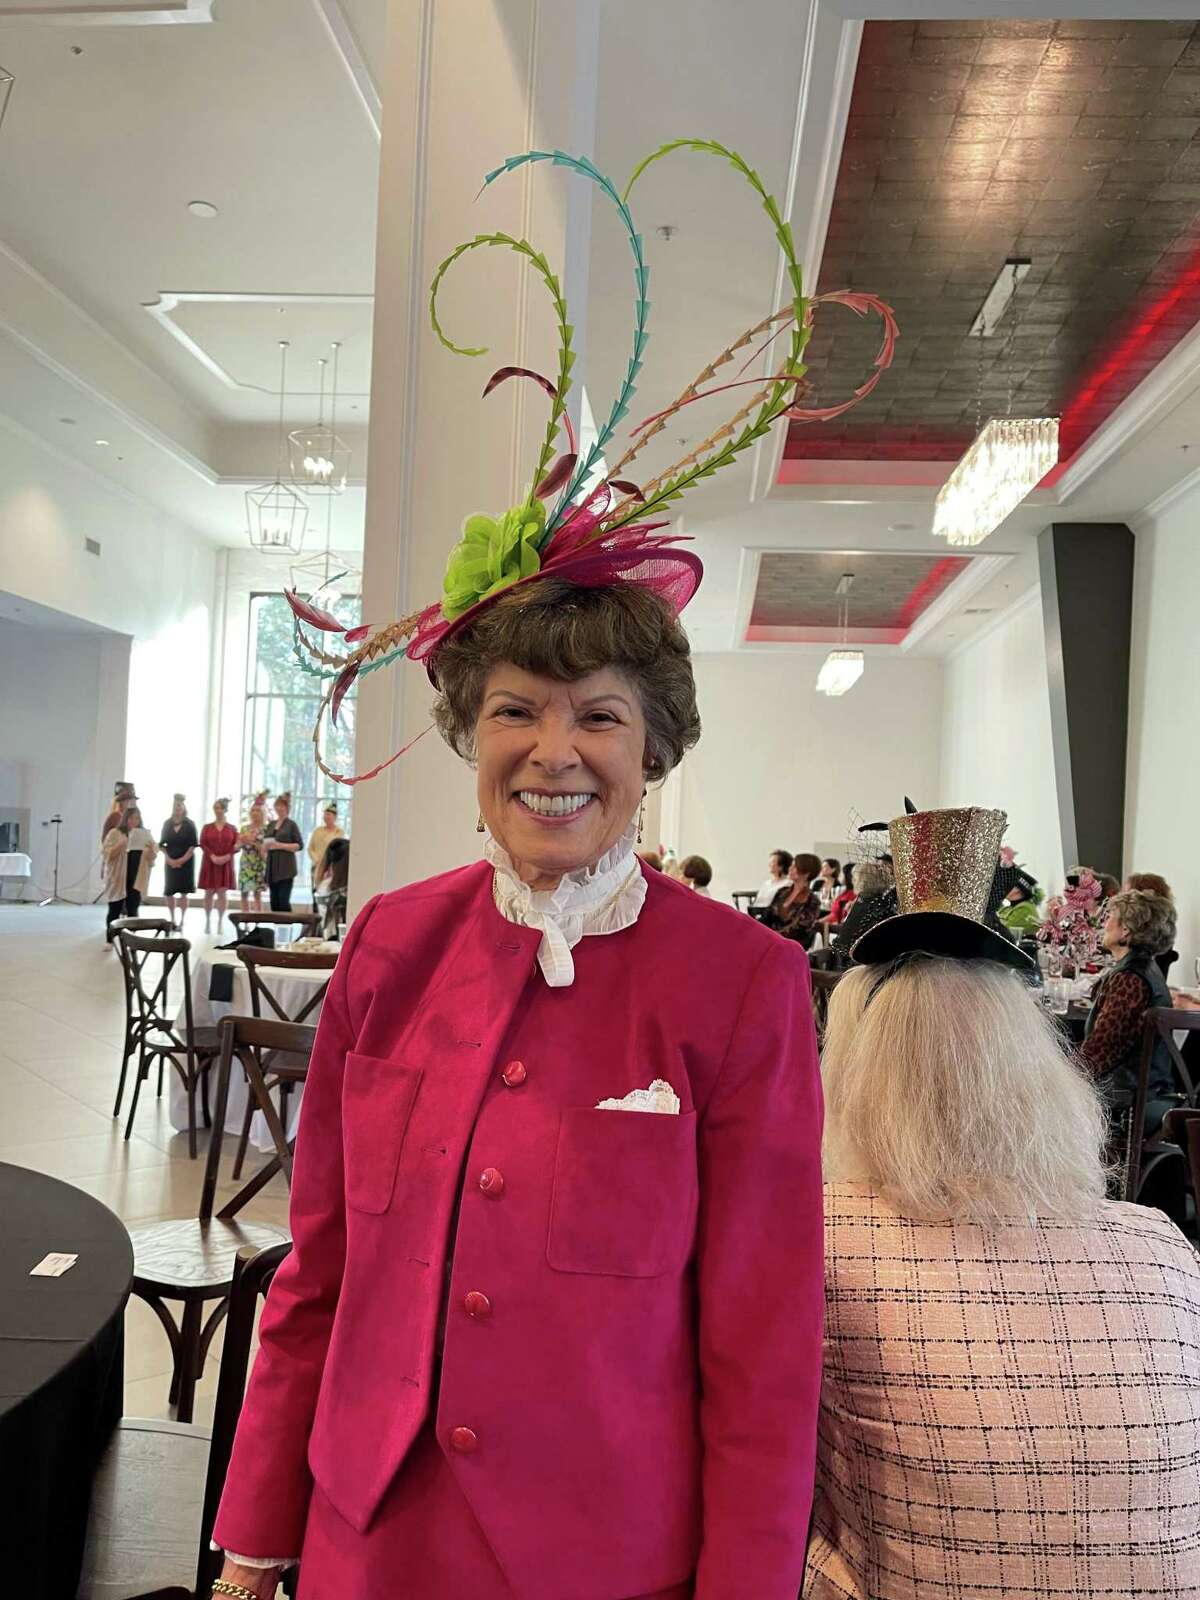 Joanna Walsh was named “Most Glamorous” in the hat contest.